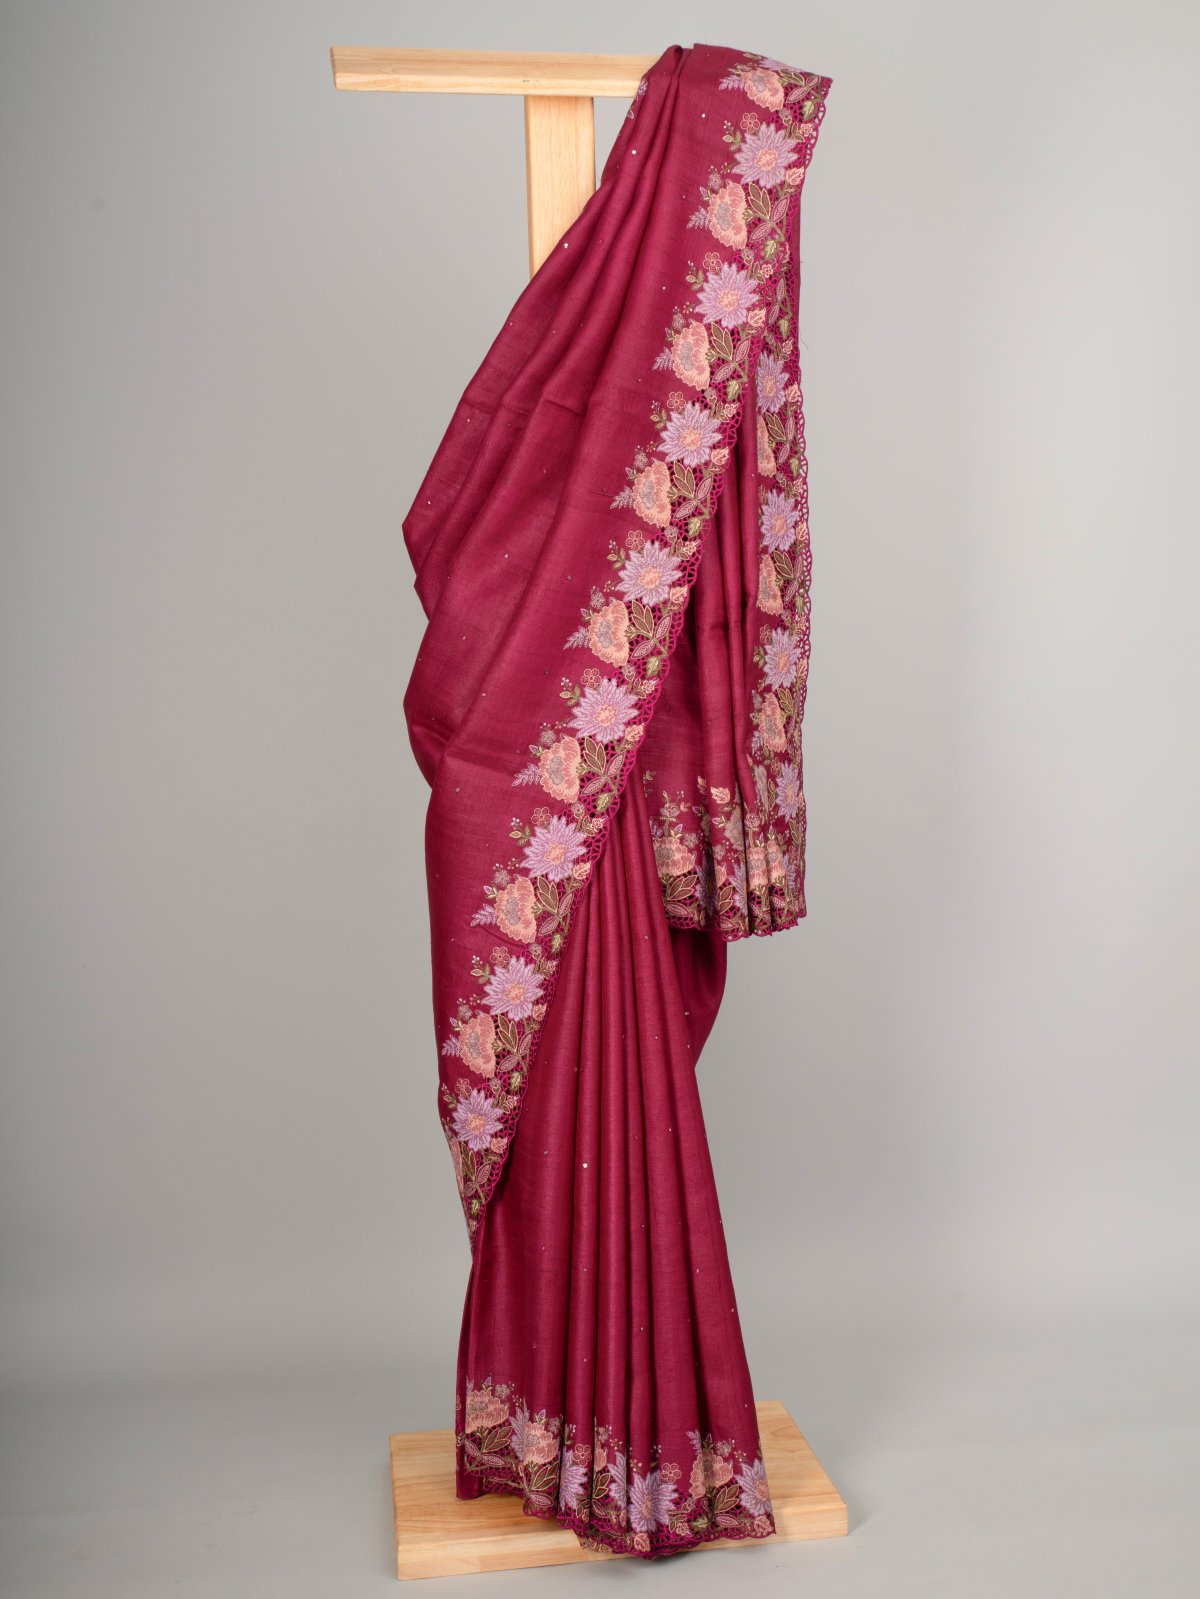 Reddish Violet Tussar Silk Saree with Floral Embroidery Border